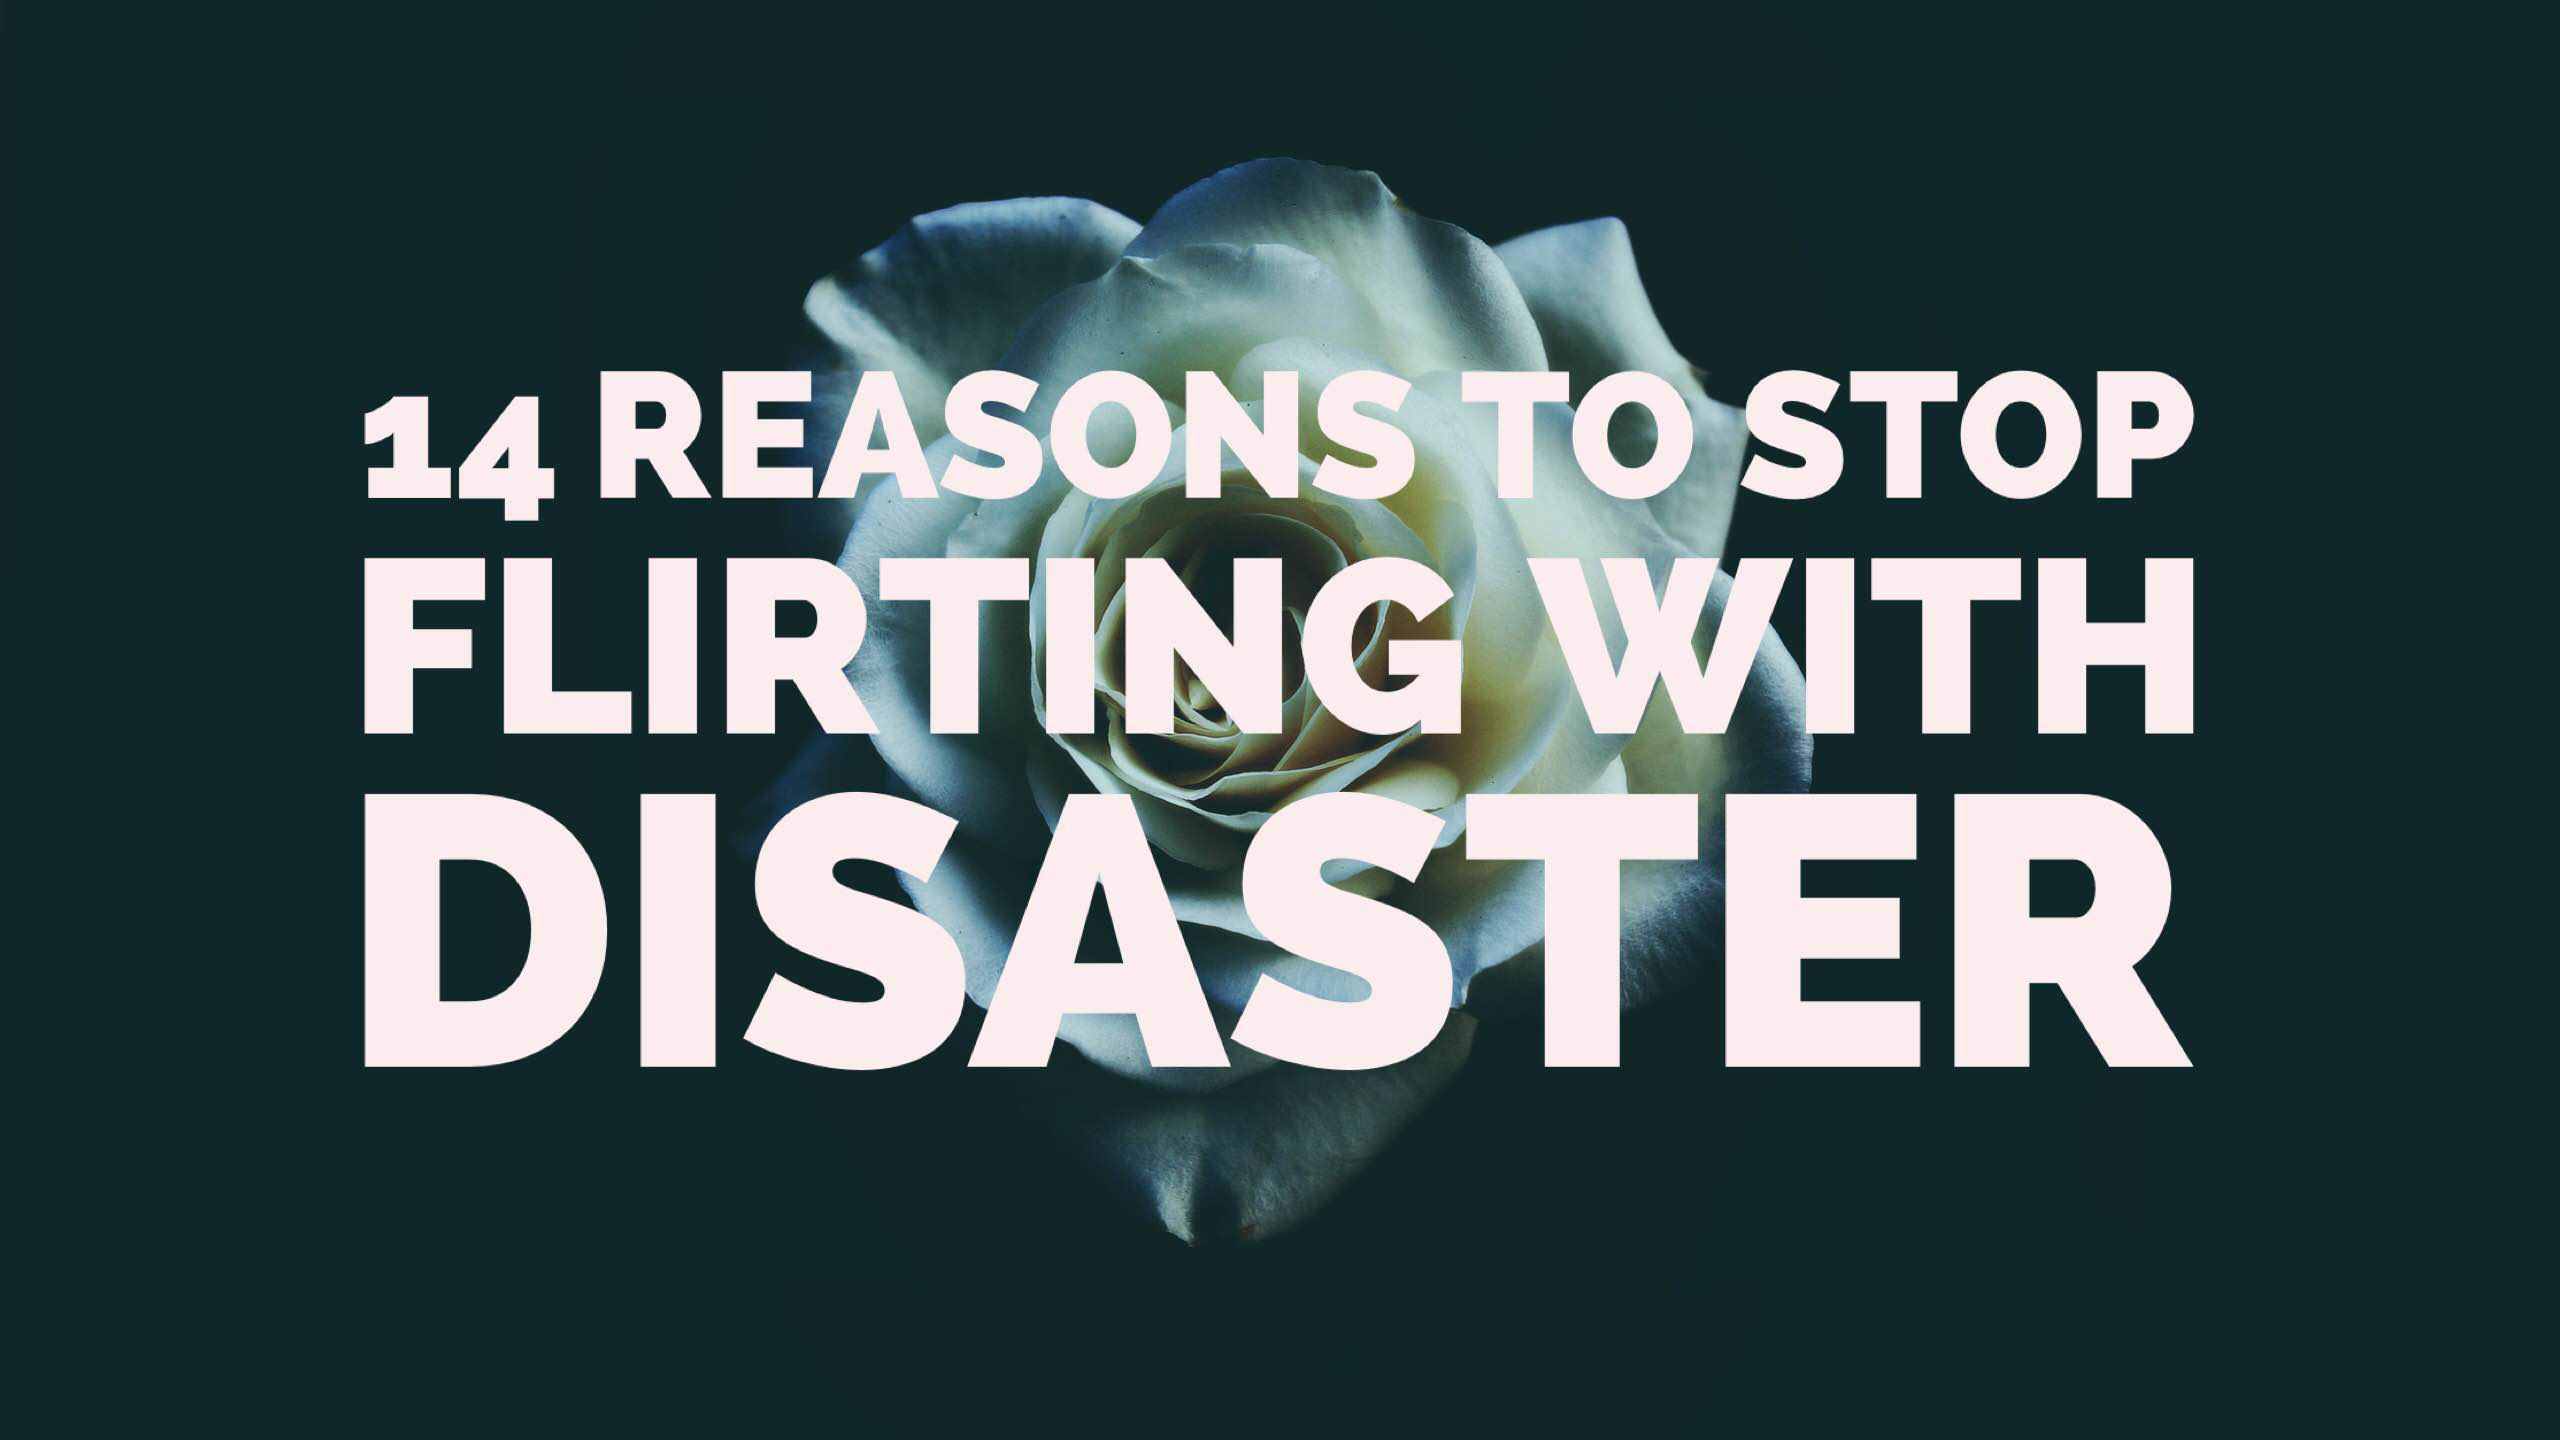 14 Reasons To Stop Flirting With Disaster